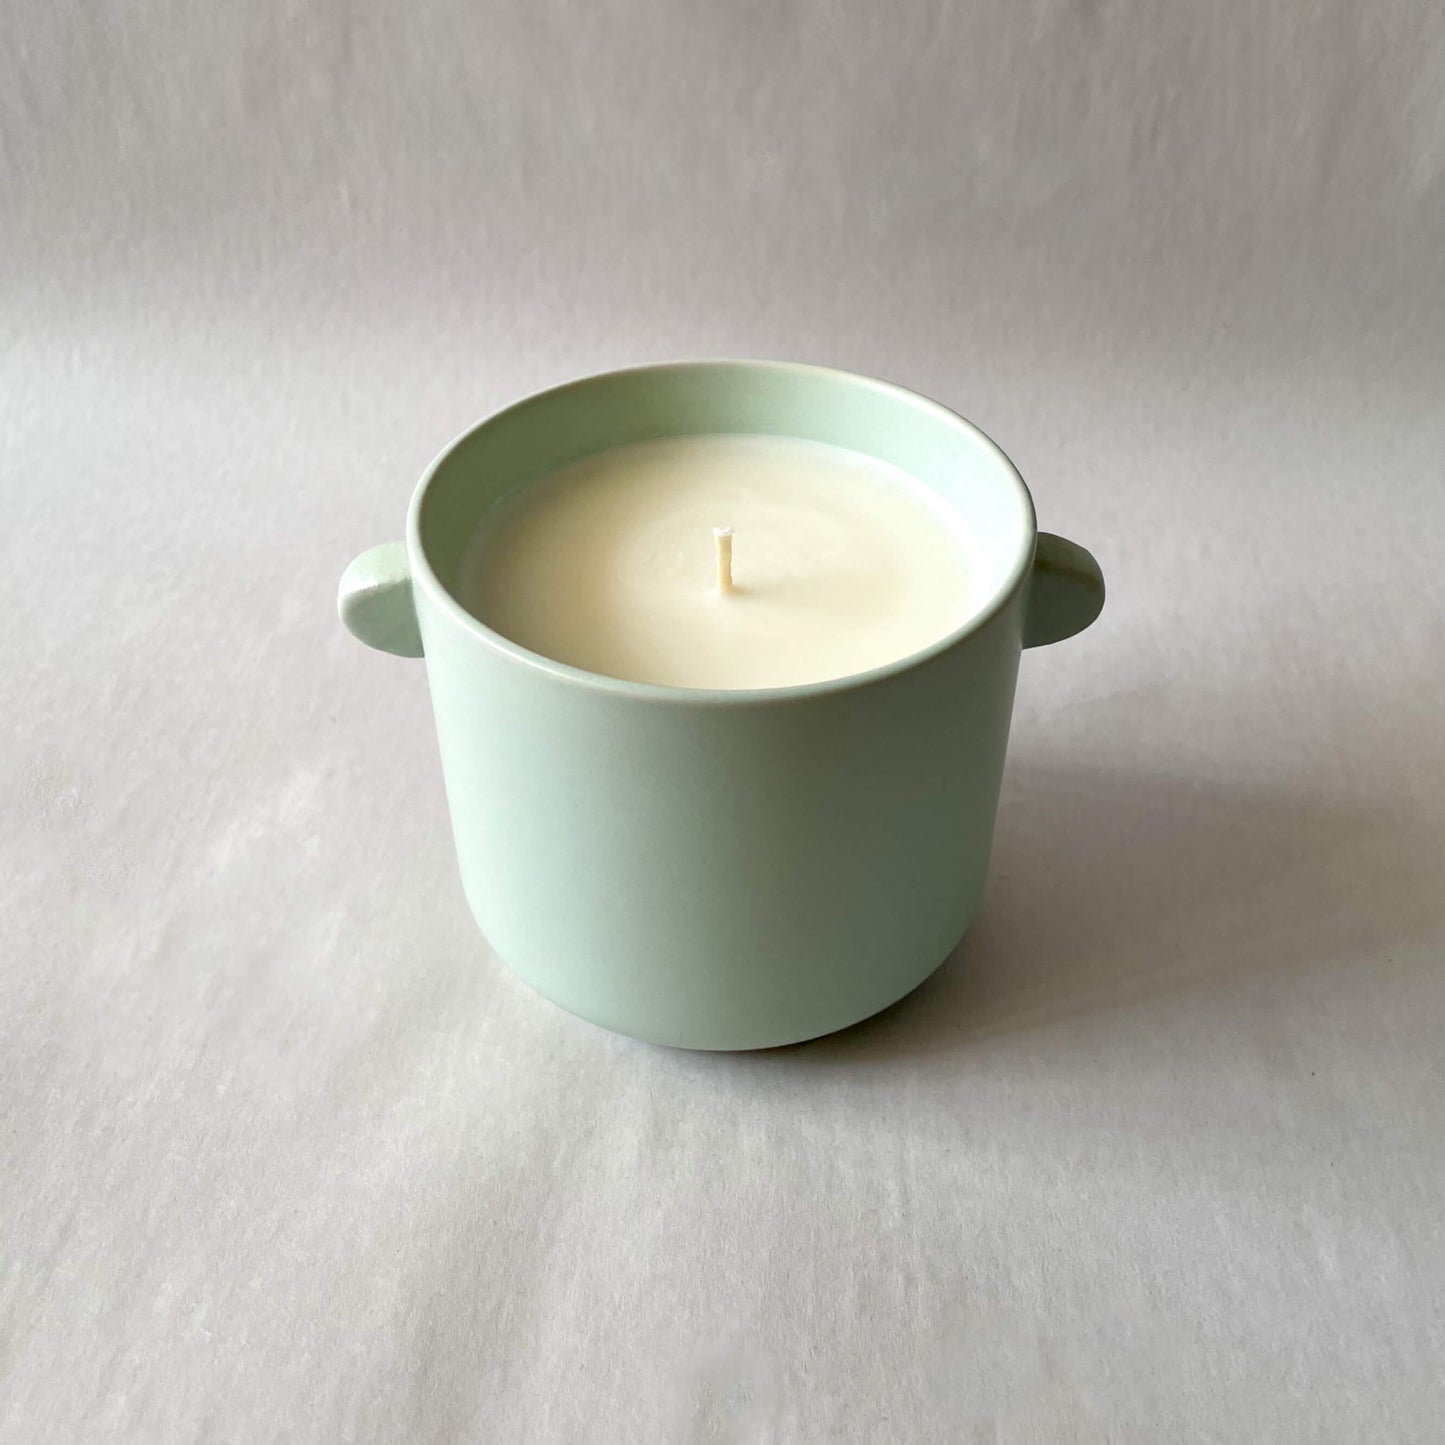 Aromatherapy Scented Pure Soy Clean Burning Candle in Mint Green Luxurious Ceramic Vessel